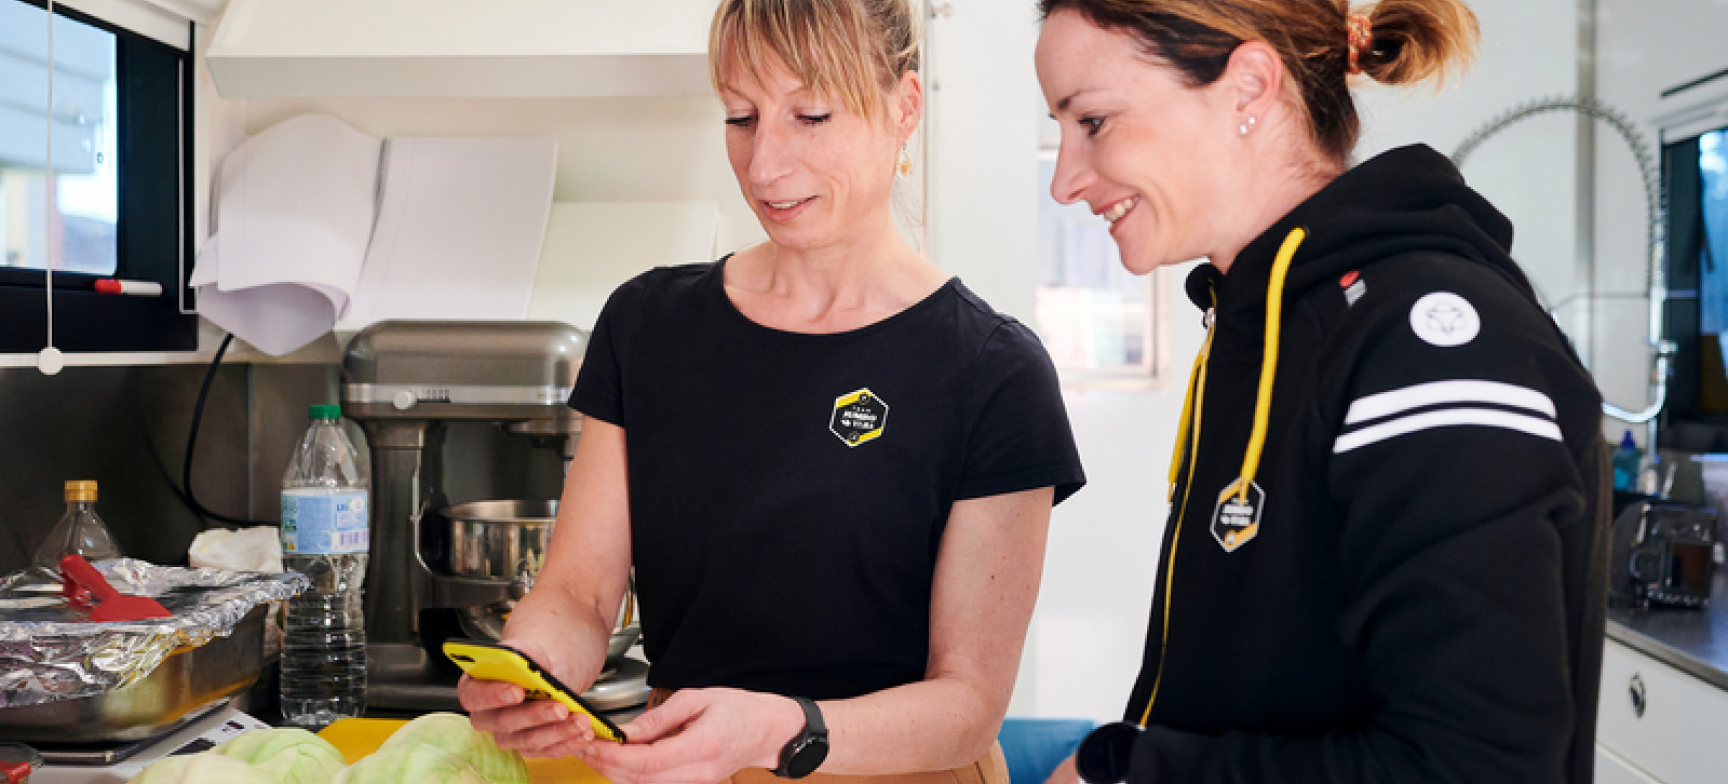 Nutritionist Karin Lambrechtse showing the FoodCoach app to Marianne vos